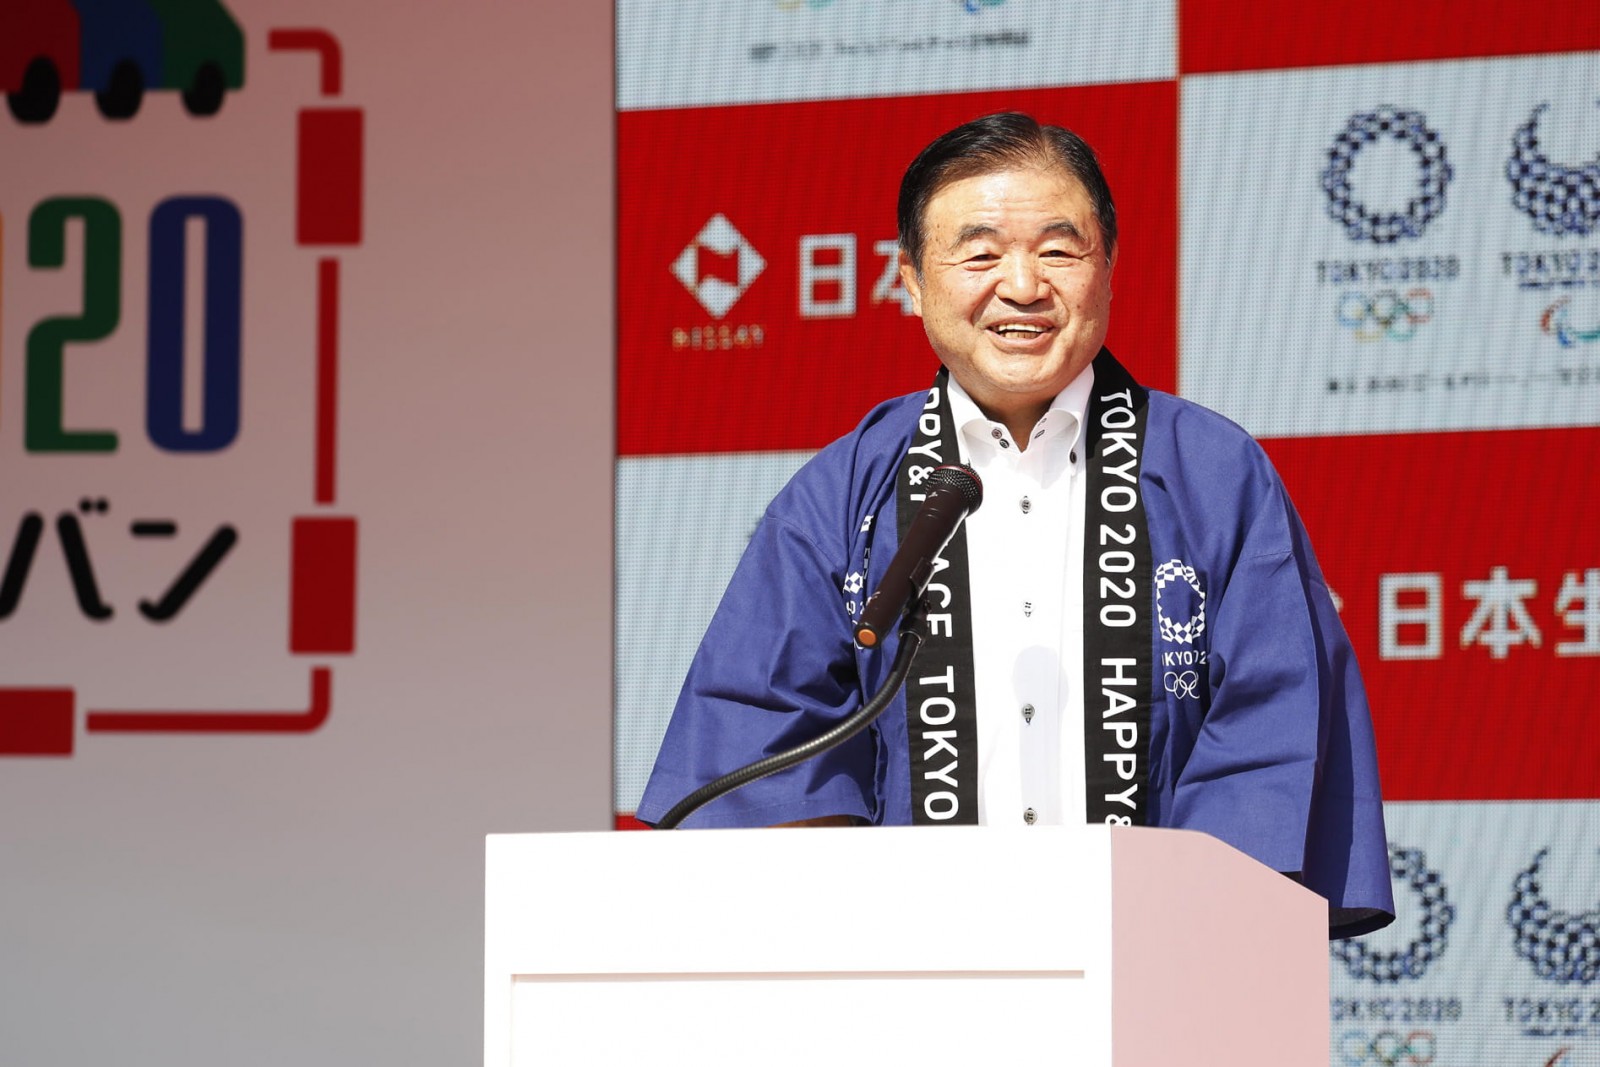 Toshiaki Endo, who served as vice-president of the Tokyo 2020 Organizing Committee, is a national politician strongly committed to sports promotion. ©Photo Kishimoto